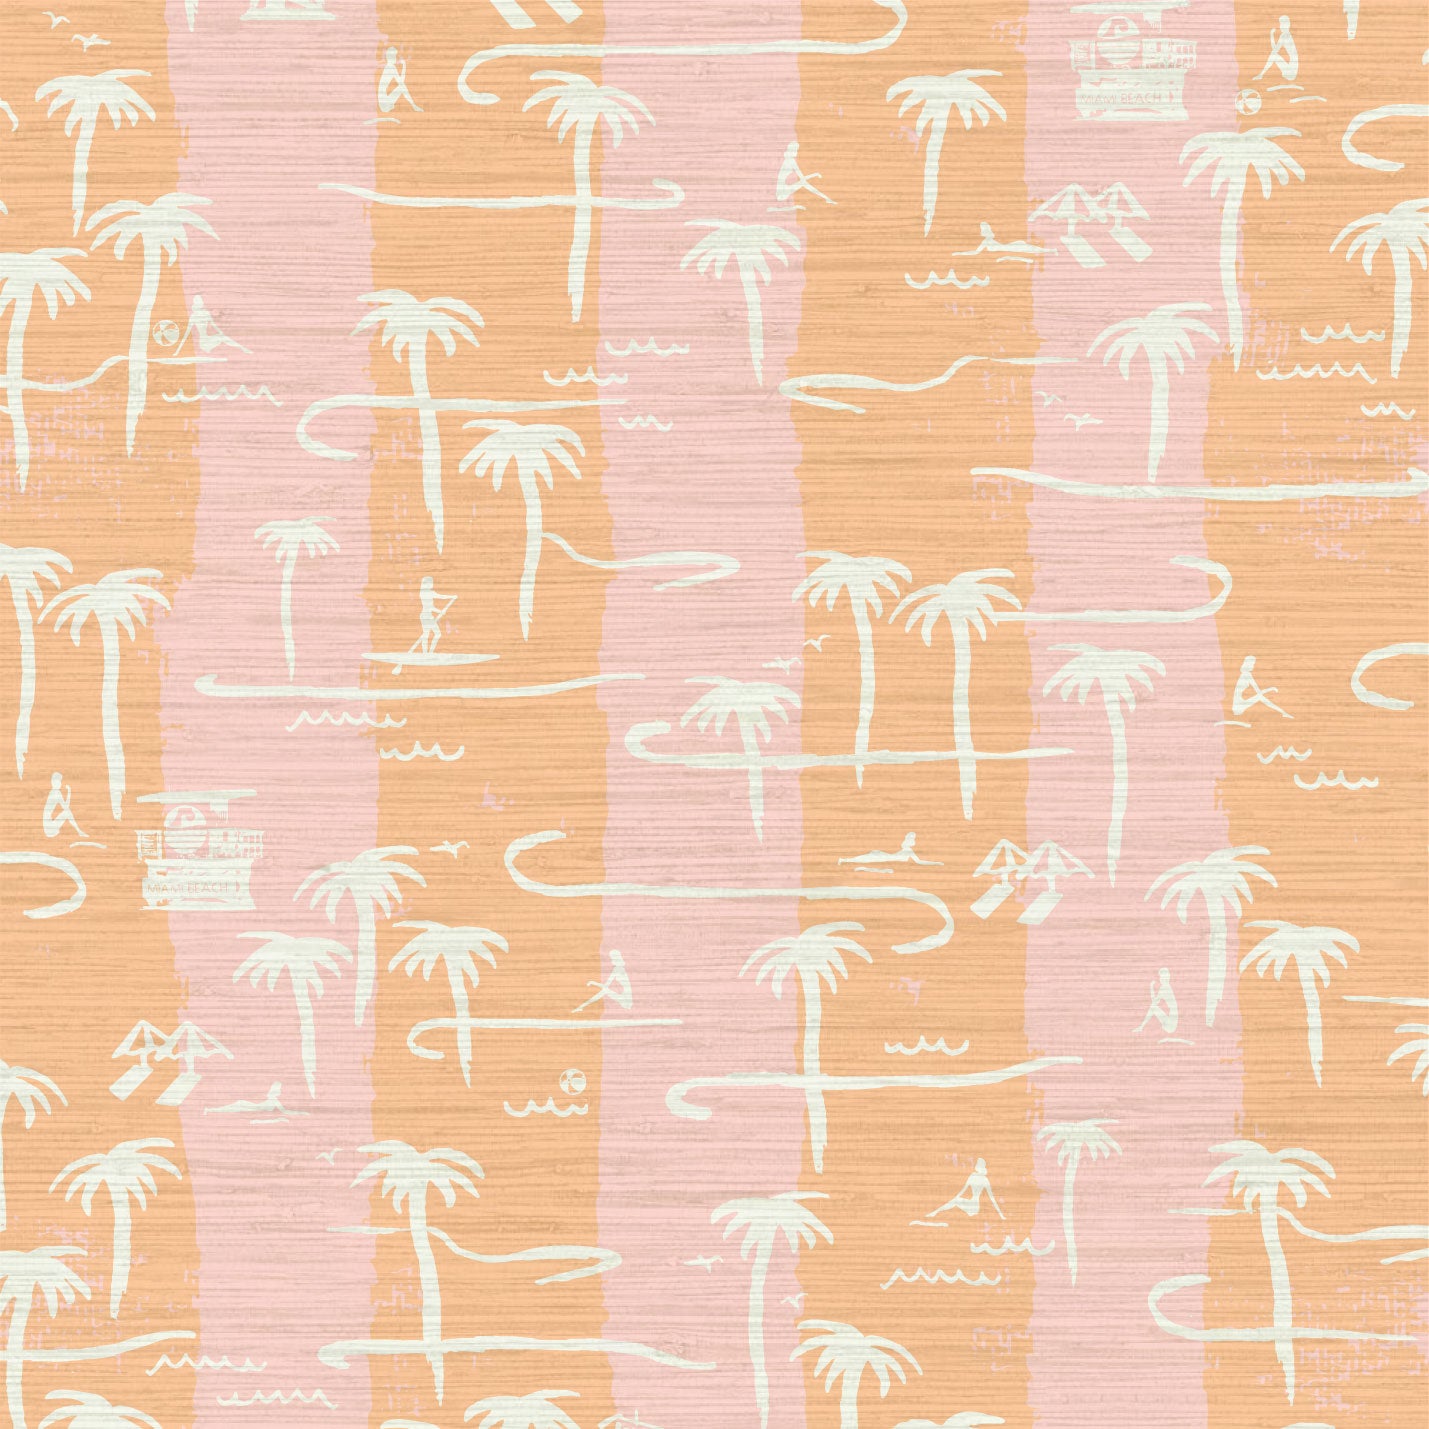 Load image into Gallery viewer, two color vertical stripe beach print featuring palm trees, beachgoers, lifeguard stands and ocean waves Grasscloth Natural Textured Eco-Friendly Non-toxic High-quality  Sustainable practices Sustainability Interior Design Wall covering Bold Wallpaper Custom Tailor-made Retro chic Tropical  Seaside Coastal Seashore Waterfront Vacation home styling Retreat Relaxed beach vibes Beach cottage Shoreline Oceanfront Nautical pink baby orange sunset tangerine coral
